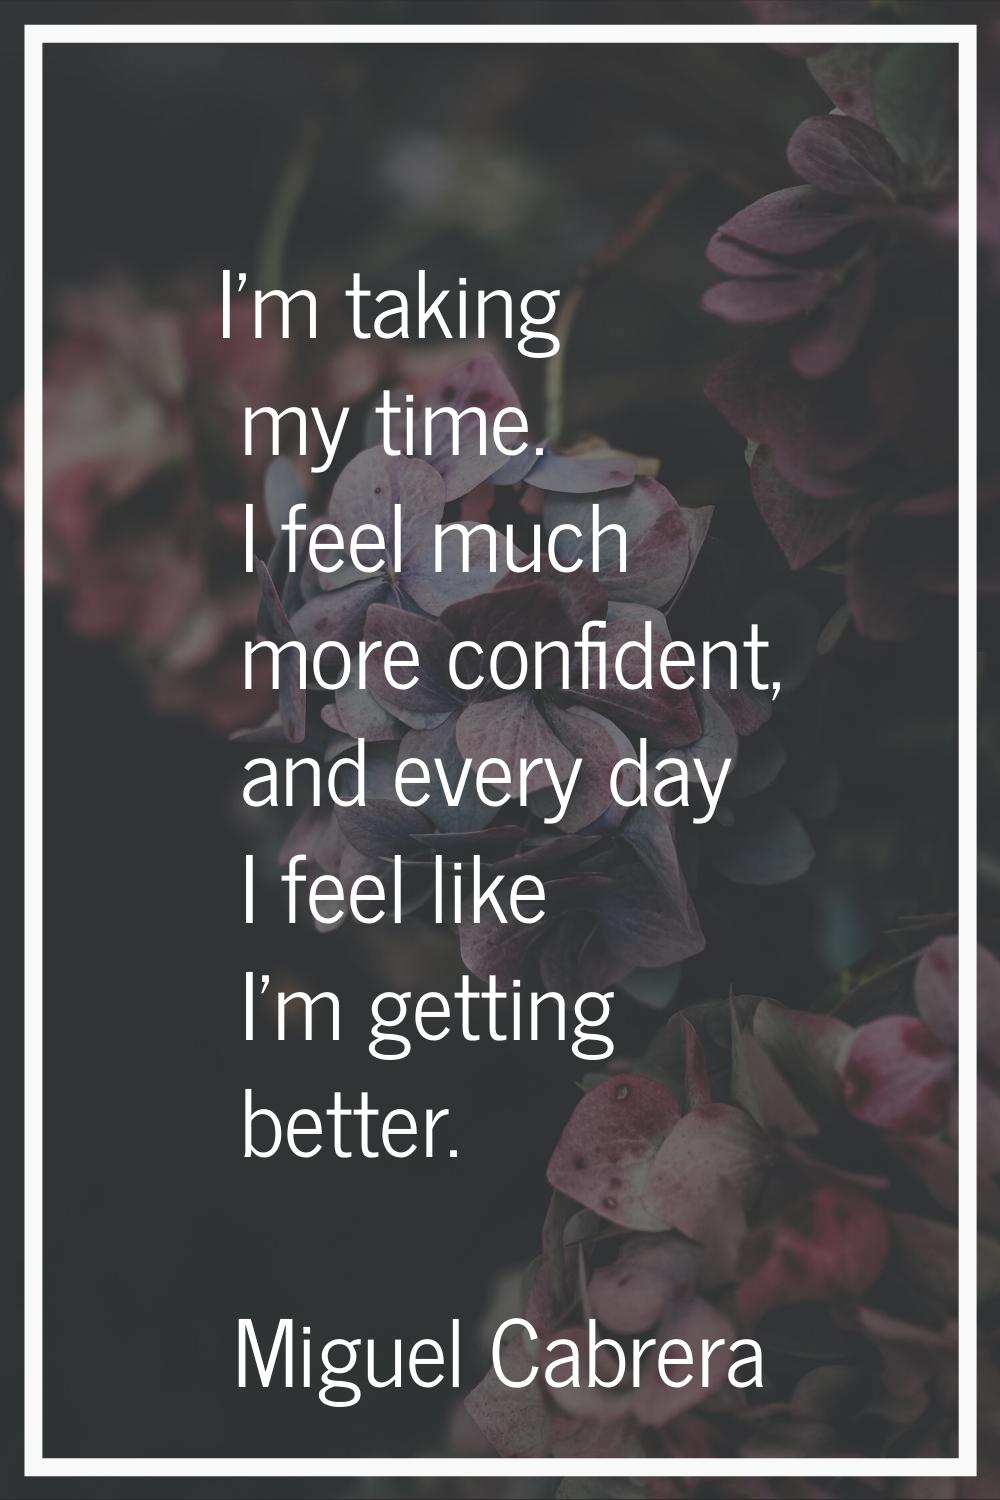 I'm taking my time. I feel much more confident, and every day I feel like I'm getting better.